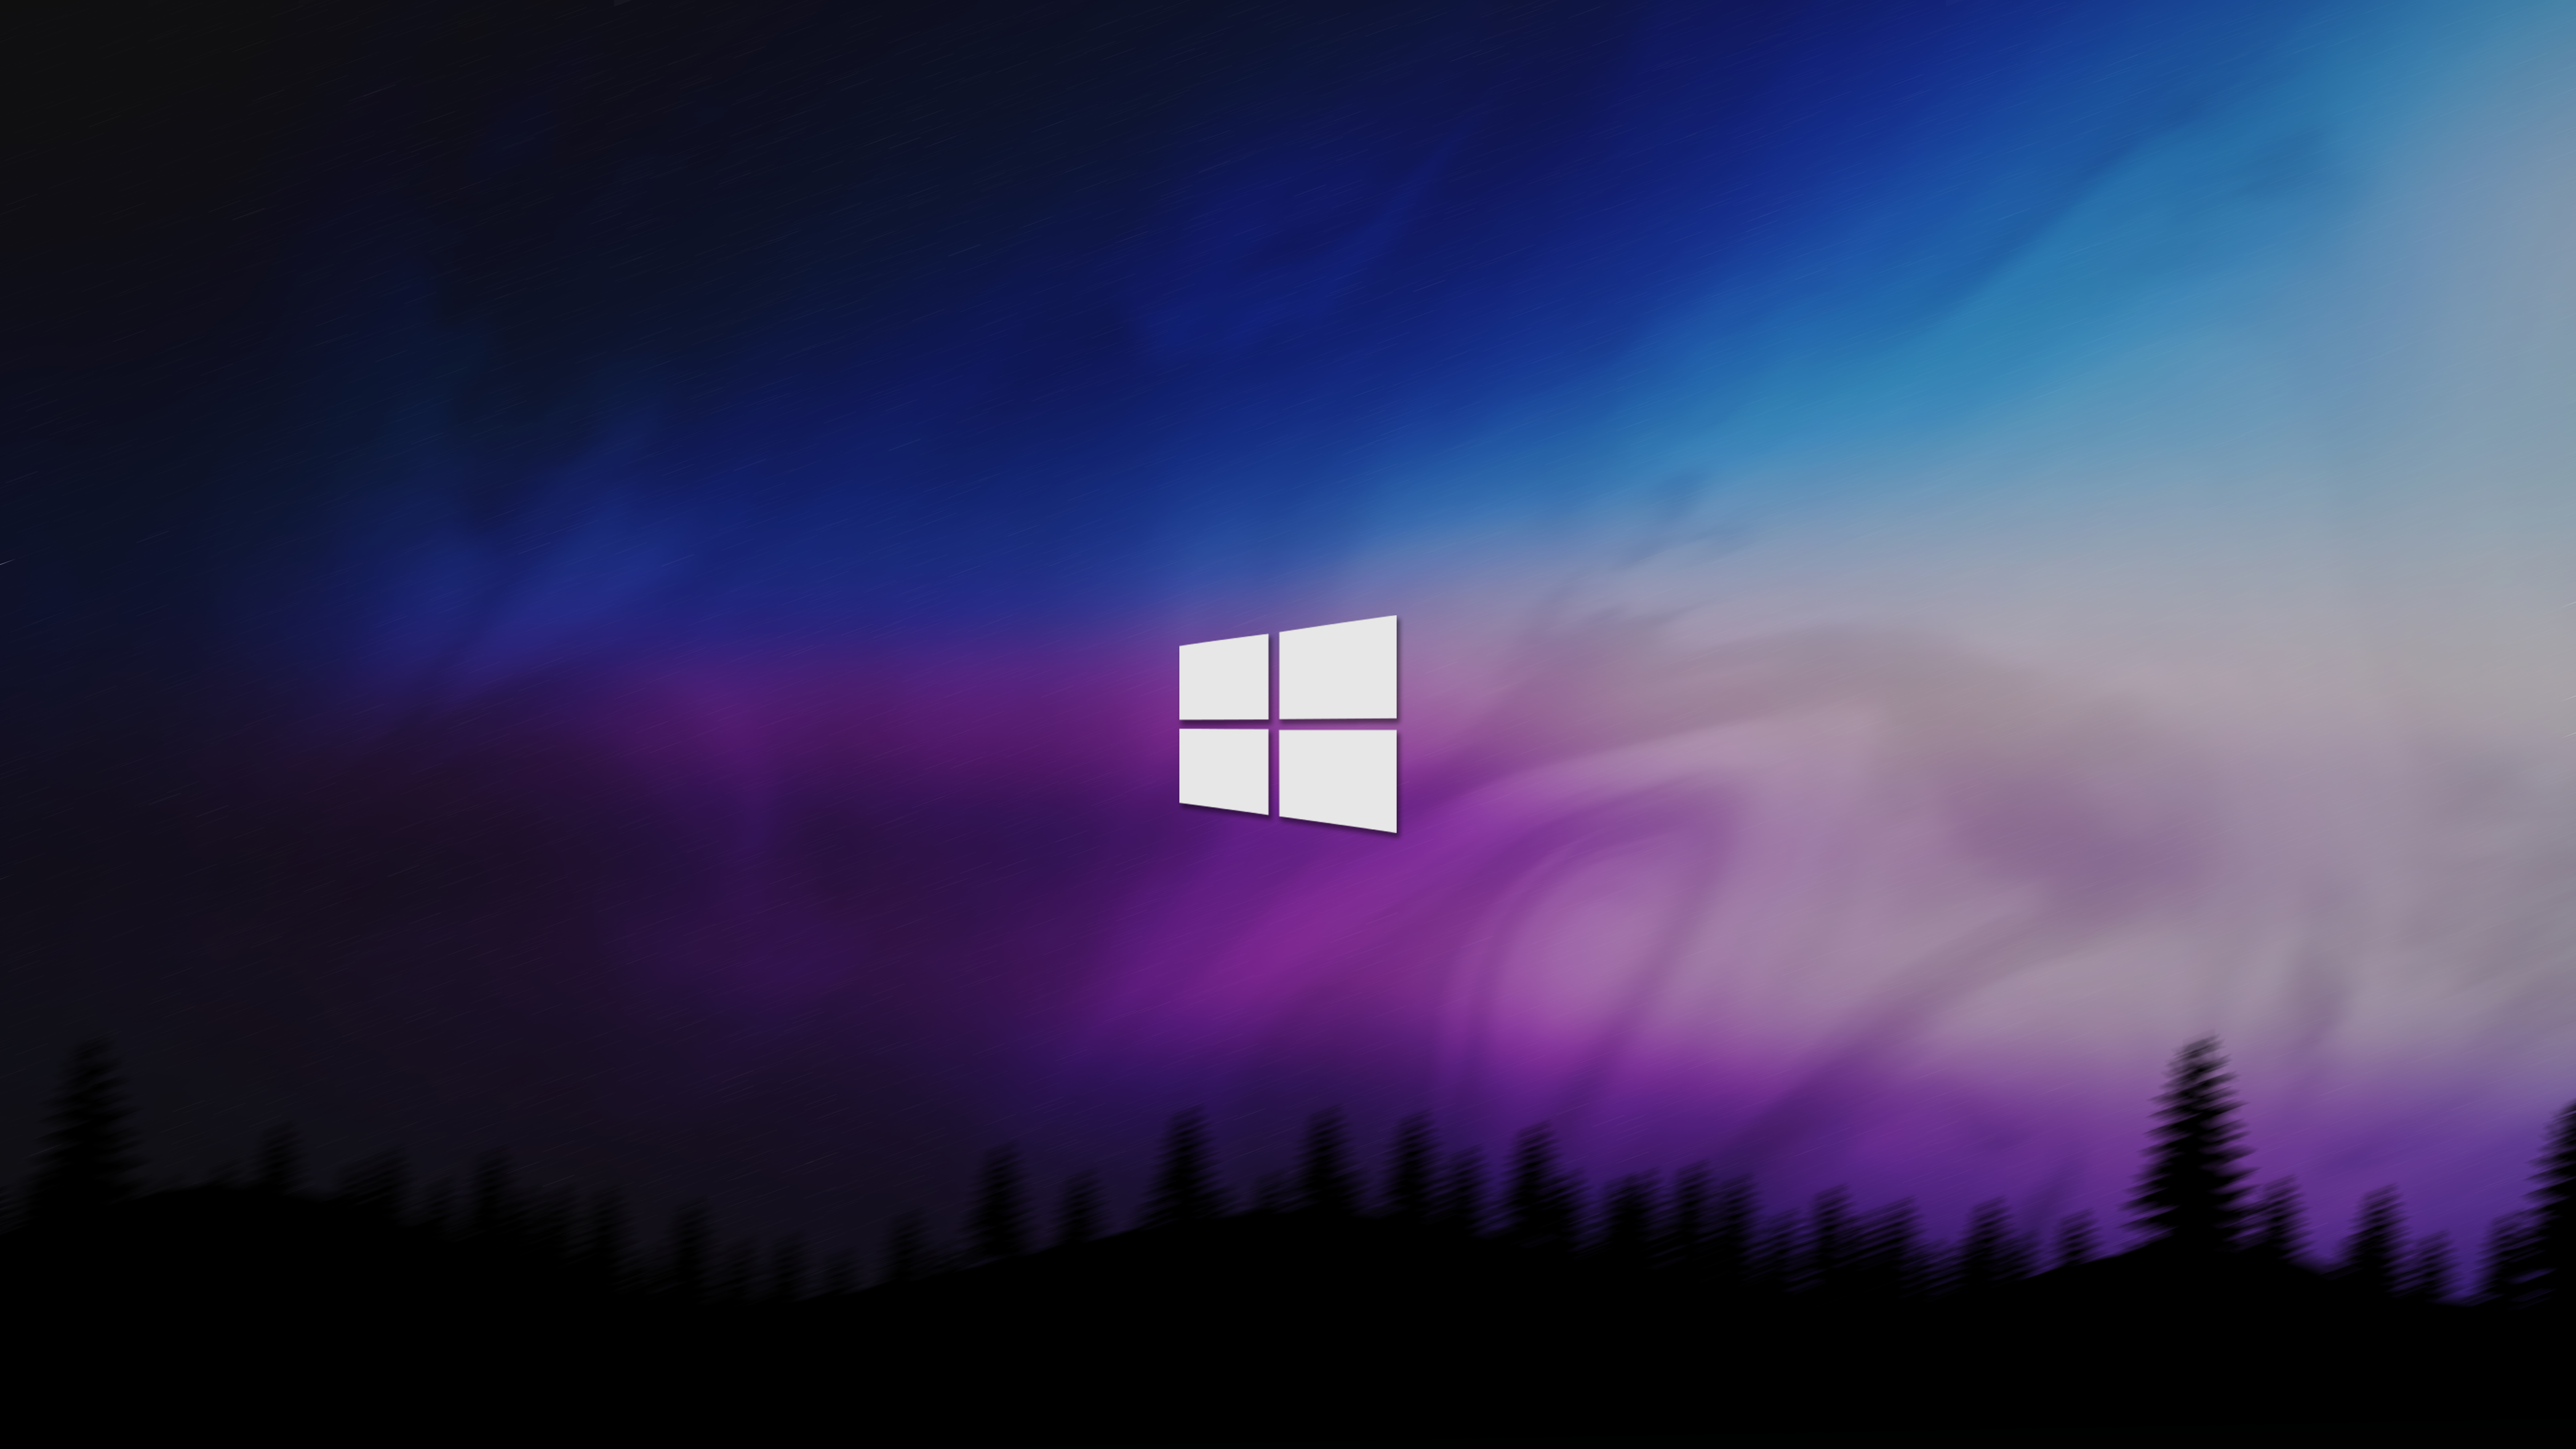 General 3840x2160 abstract blurred gradient operating system pine trees Microsoft Microsoft Windows logo windows logo Windows 10 digital art